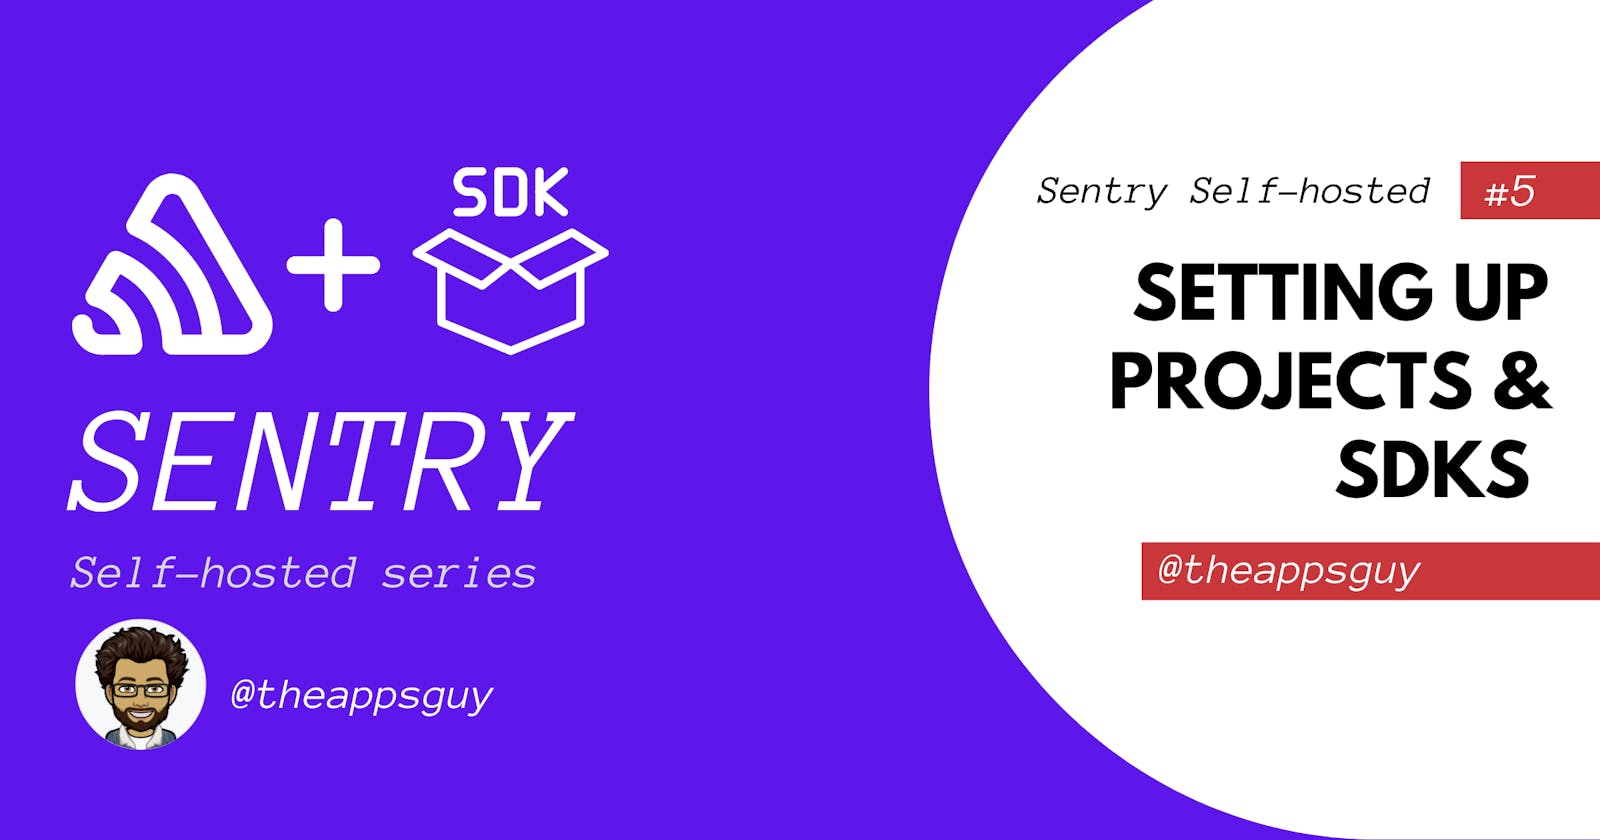 Setting up projects & SDKs for Sentry self-hosted